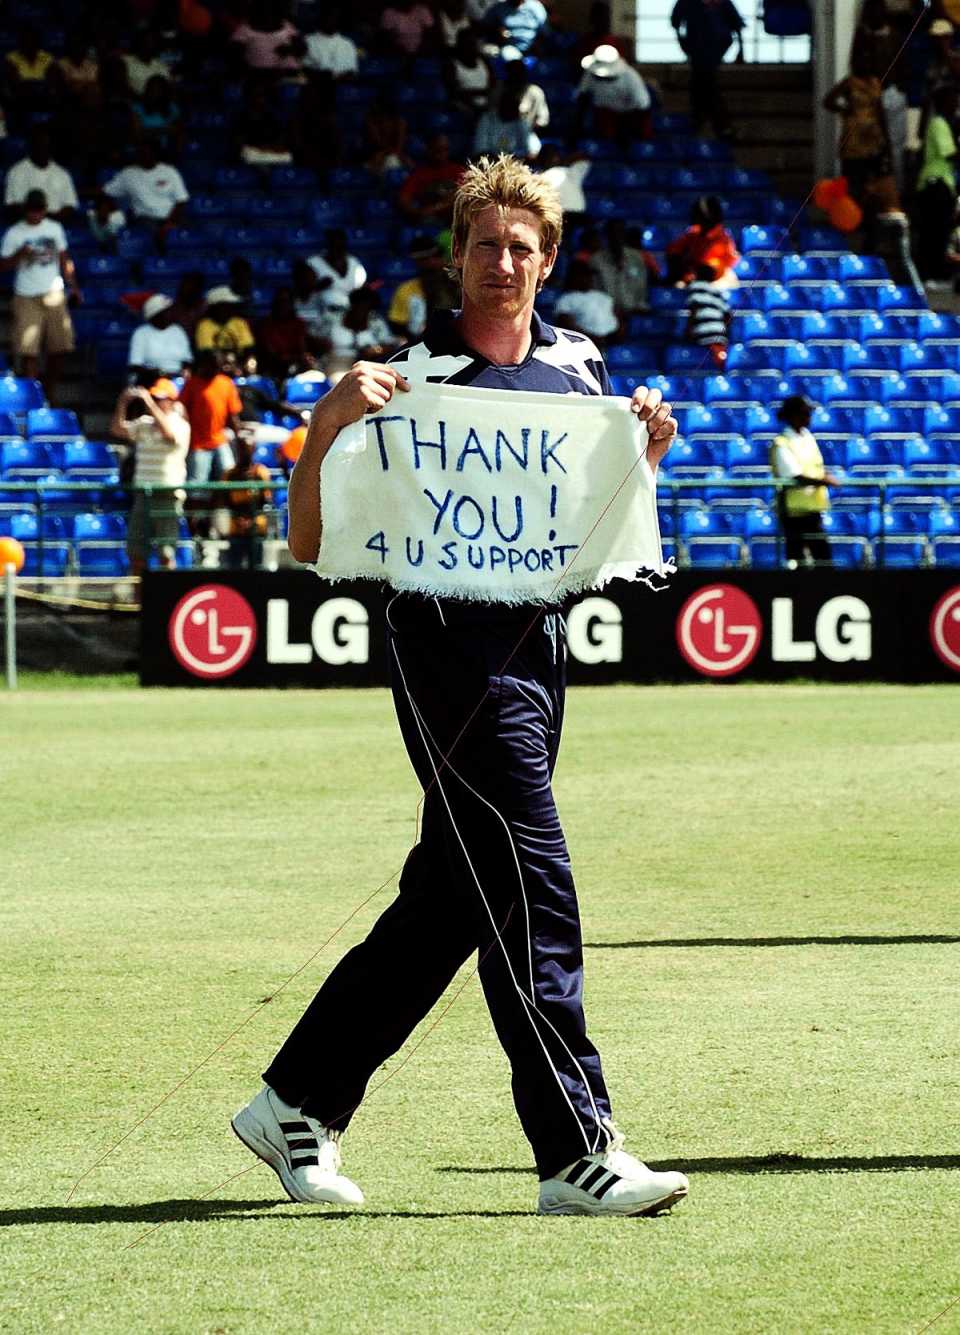 John Blain holds up a sign for Scotland supporters at the end of the team's defeat to Netherlands in the 2007 World Cup